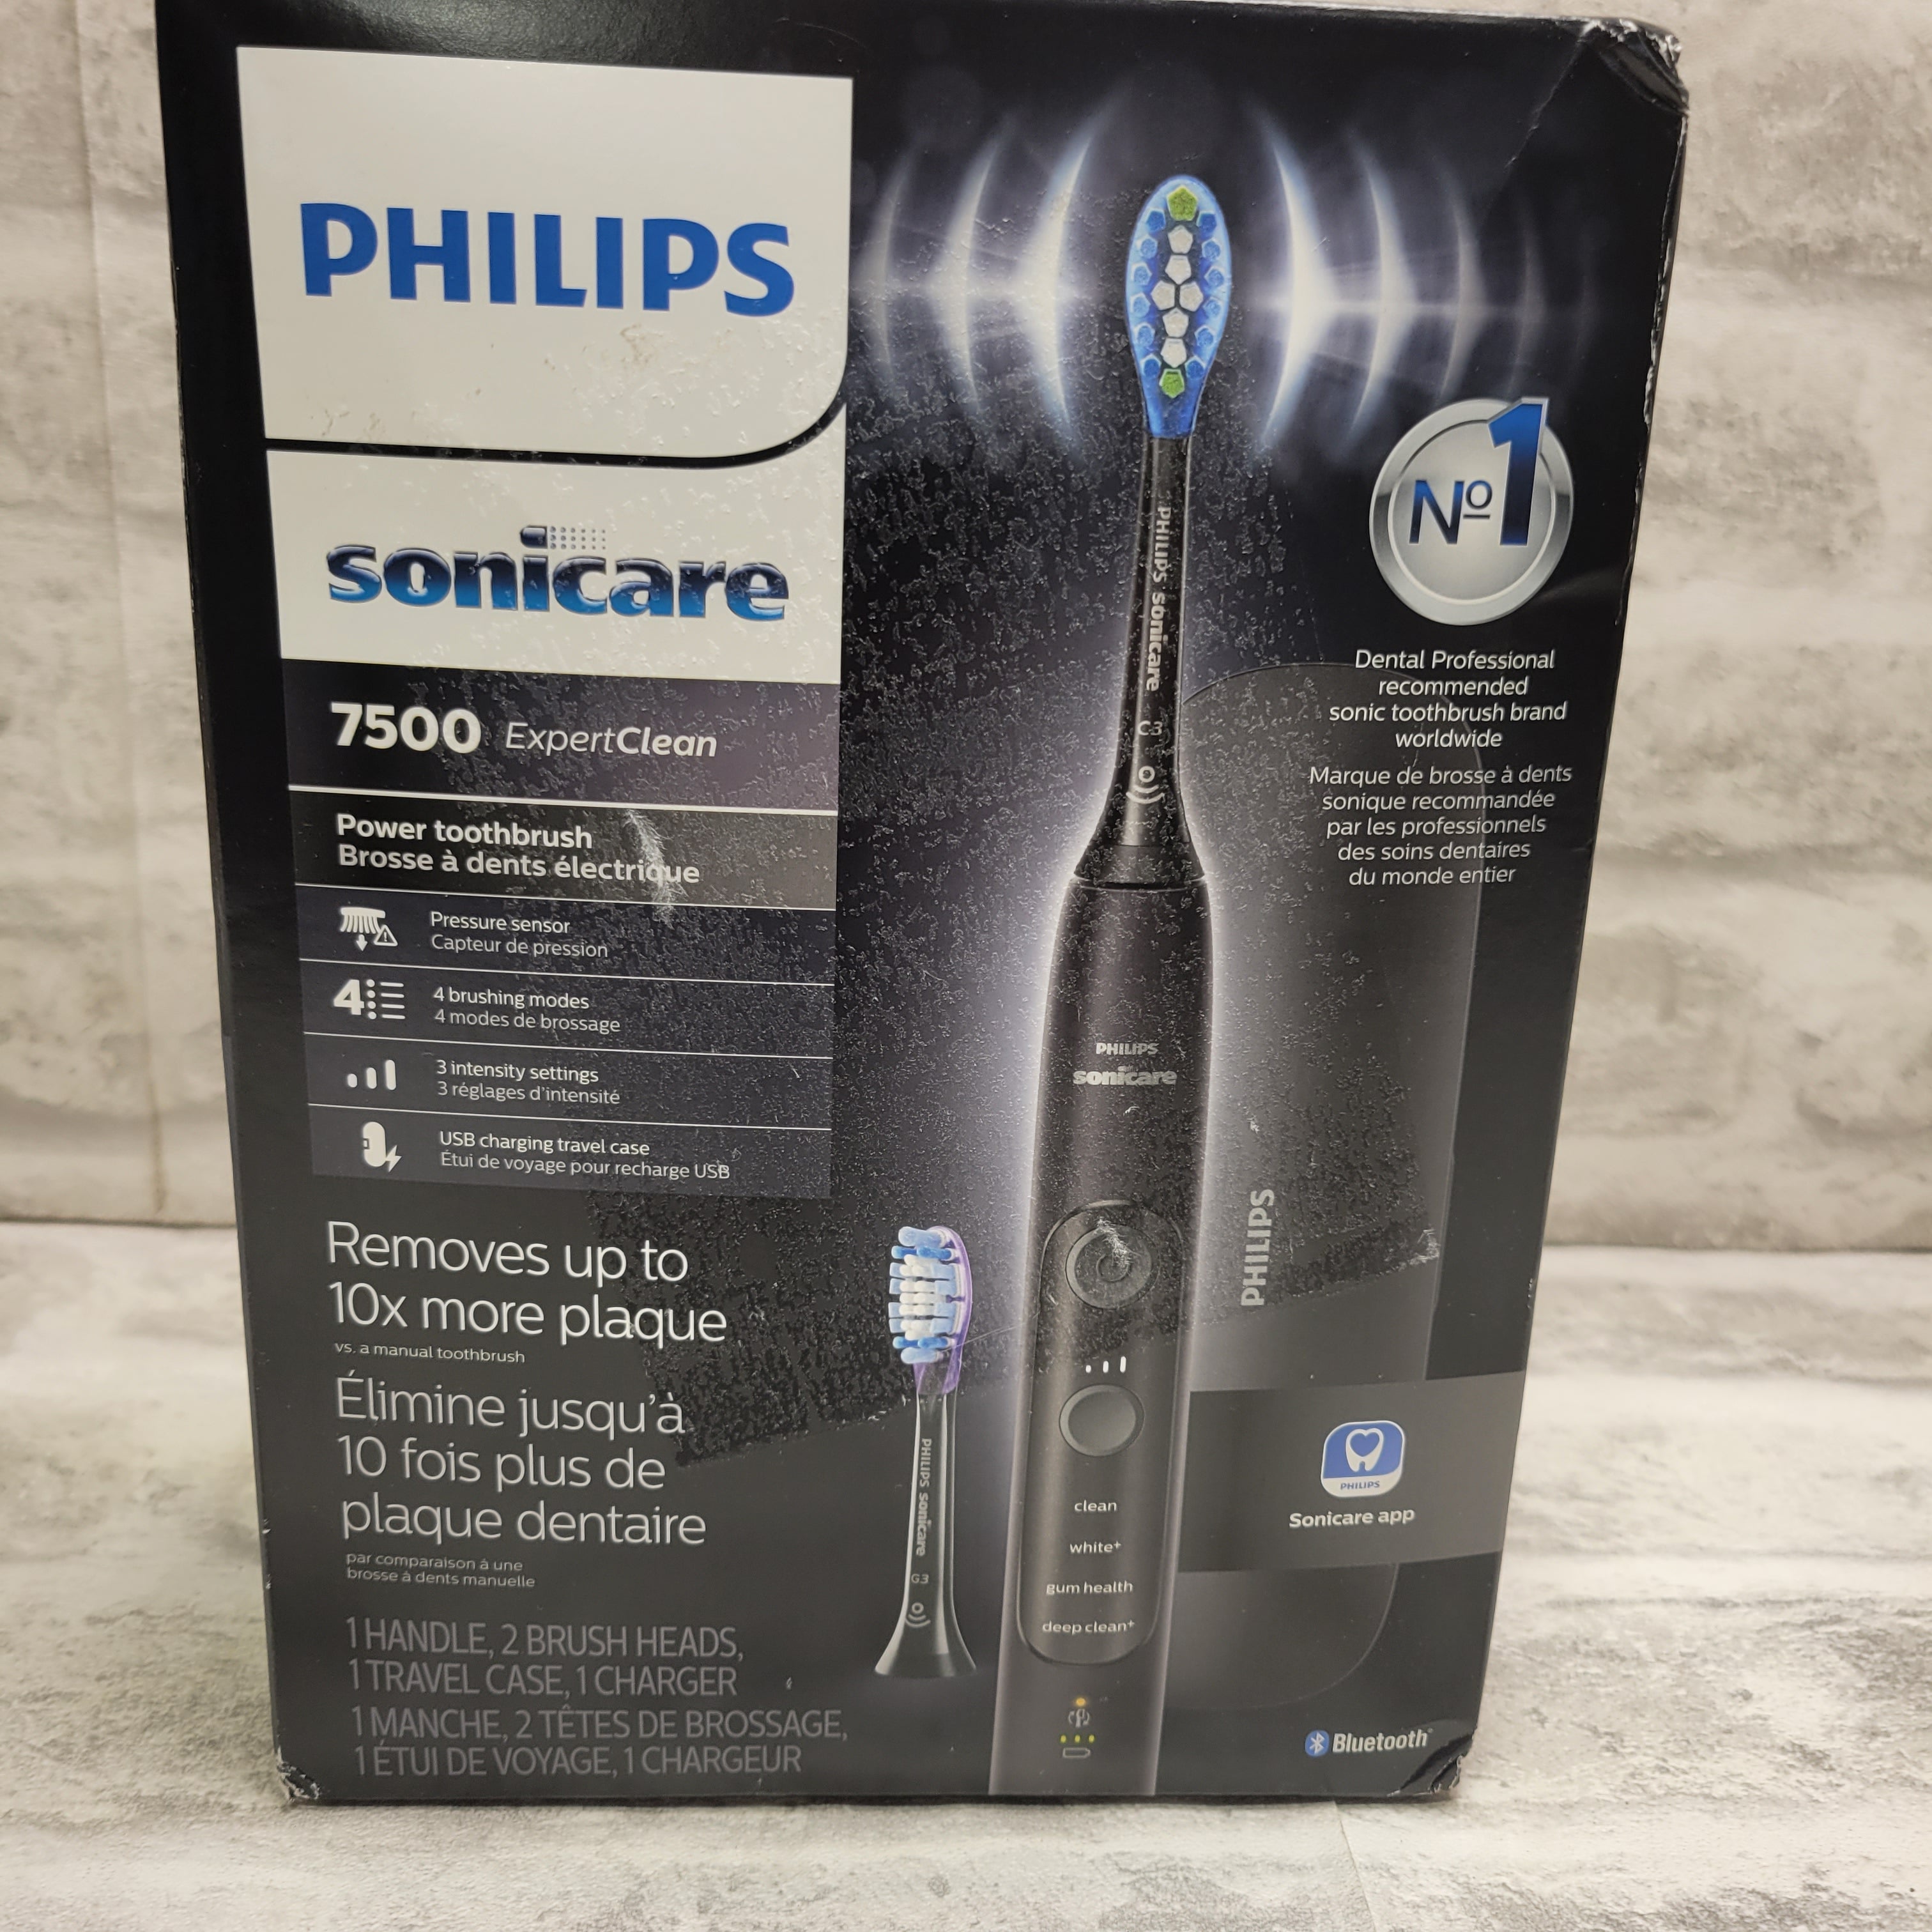 Philips Sonicare ExpertClean 7500, Electric Power Toothbrush, Black, HX9690/05 (7776190562542)